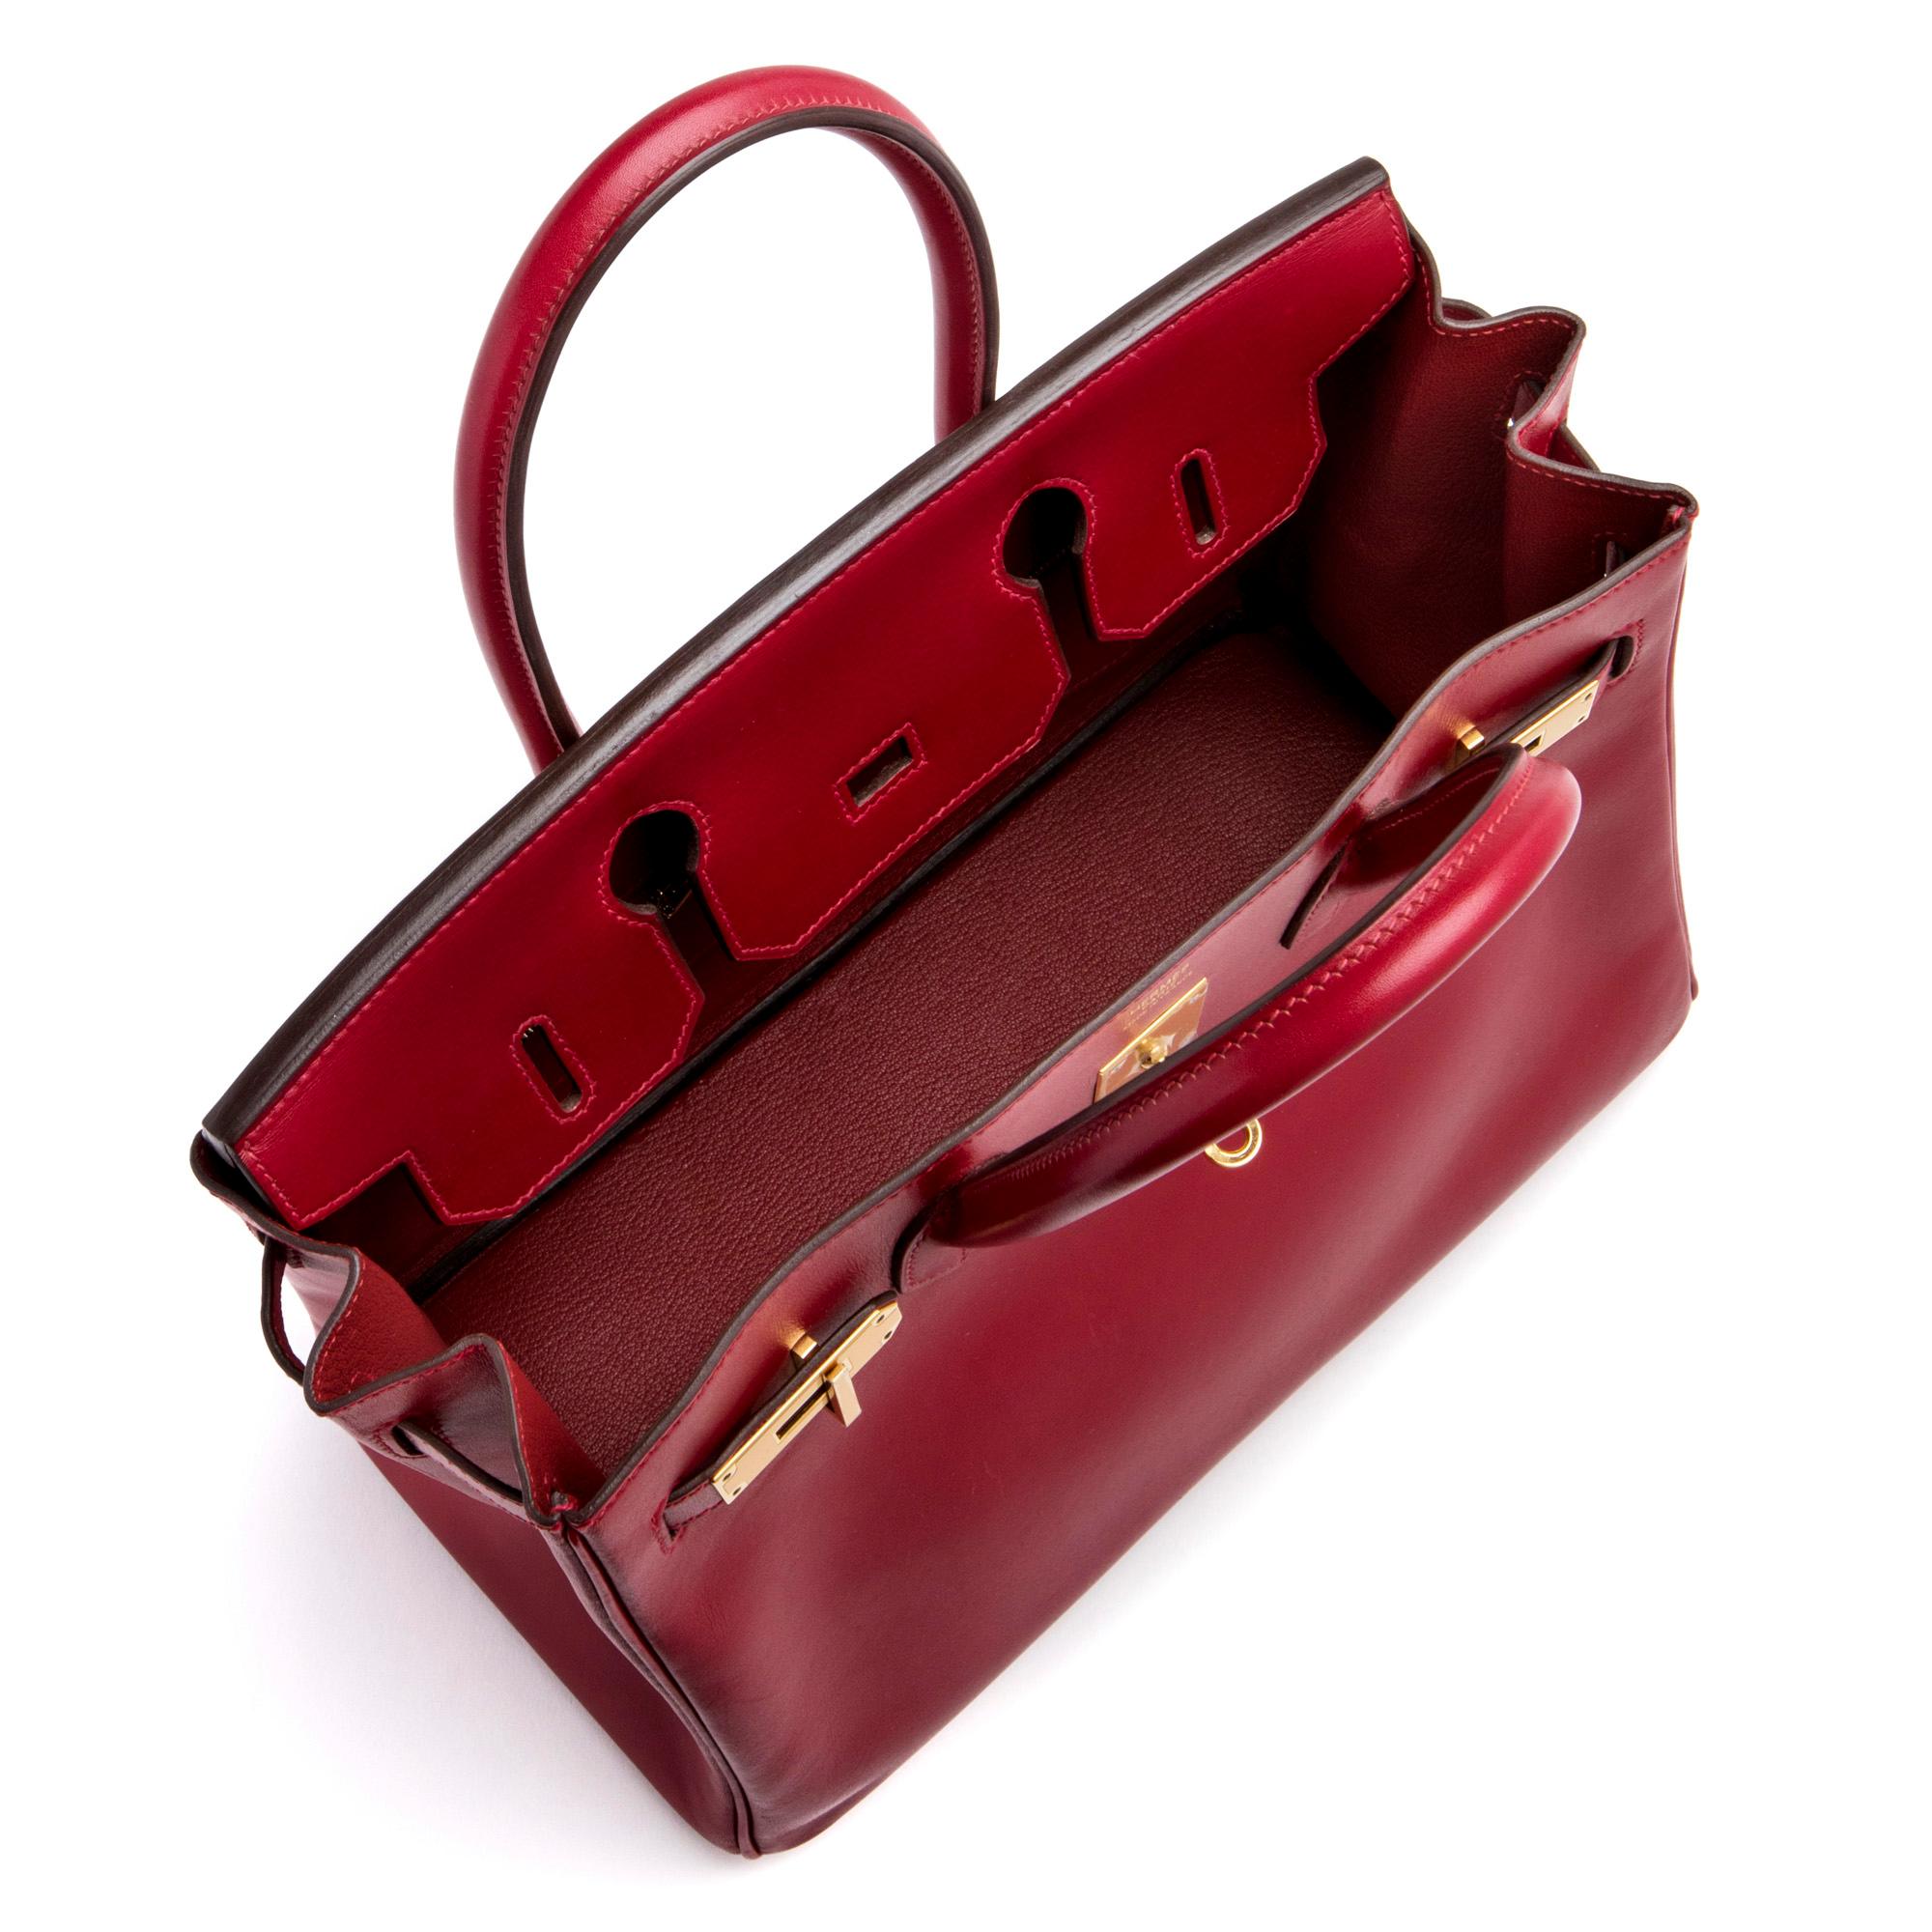 Hermés Rouge Birkin 30cm In Excellent Condition For Sale In New York, NY